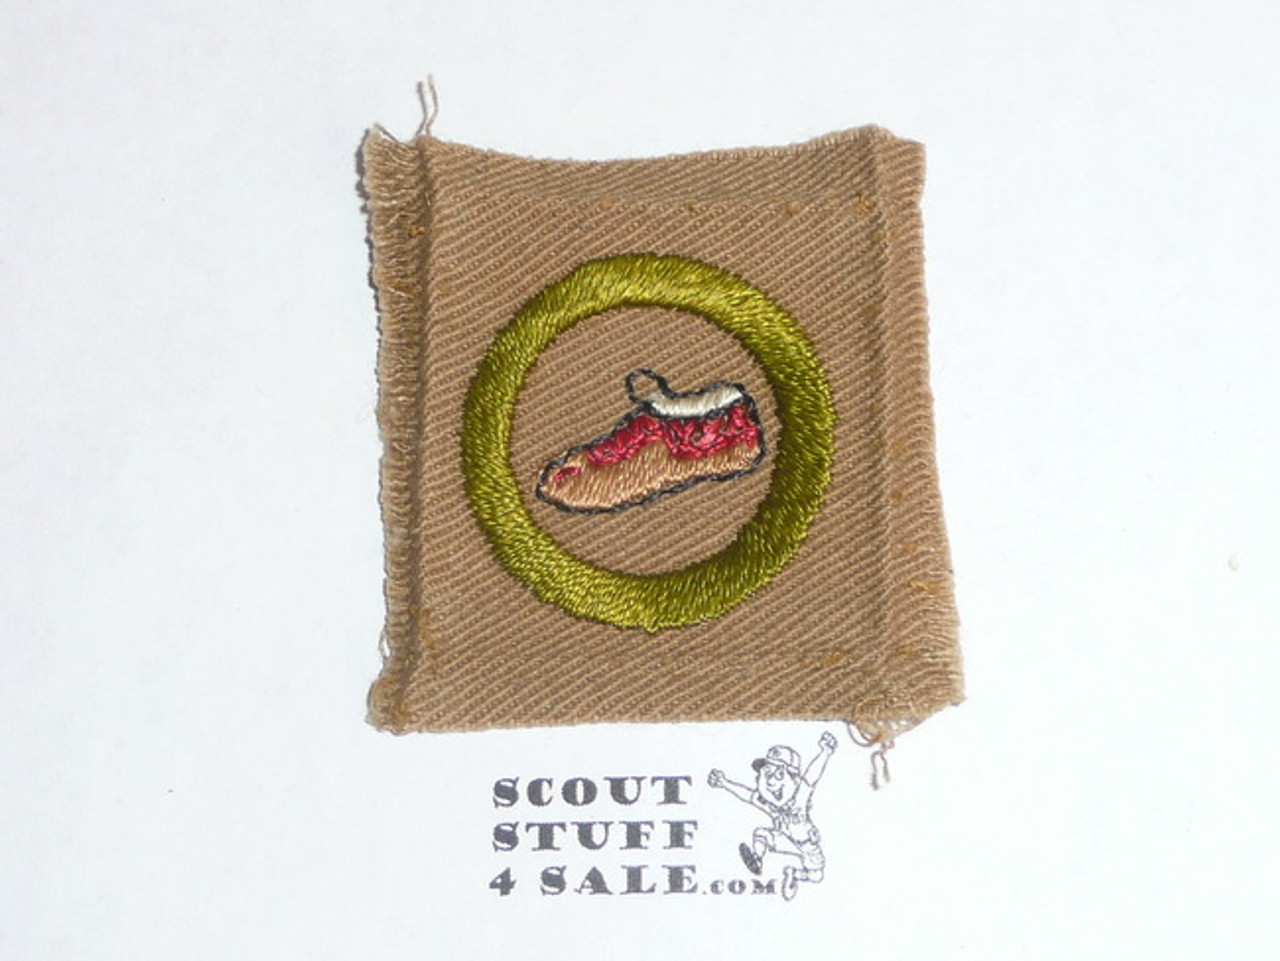 Leatherworking (moccasin) - Type A - Square Tan Merit Badge (1911-1933), lt use